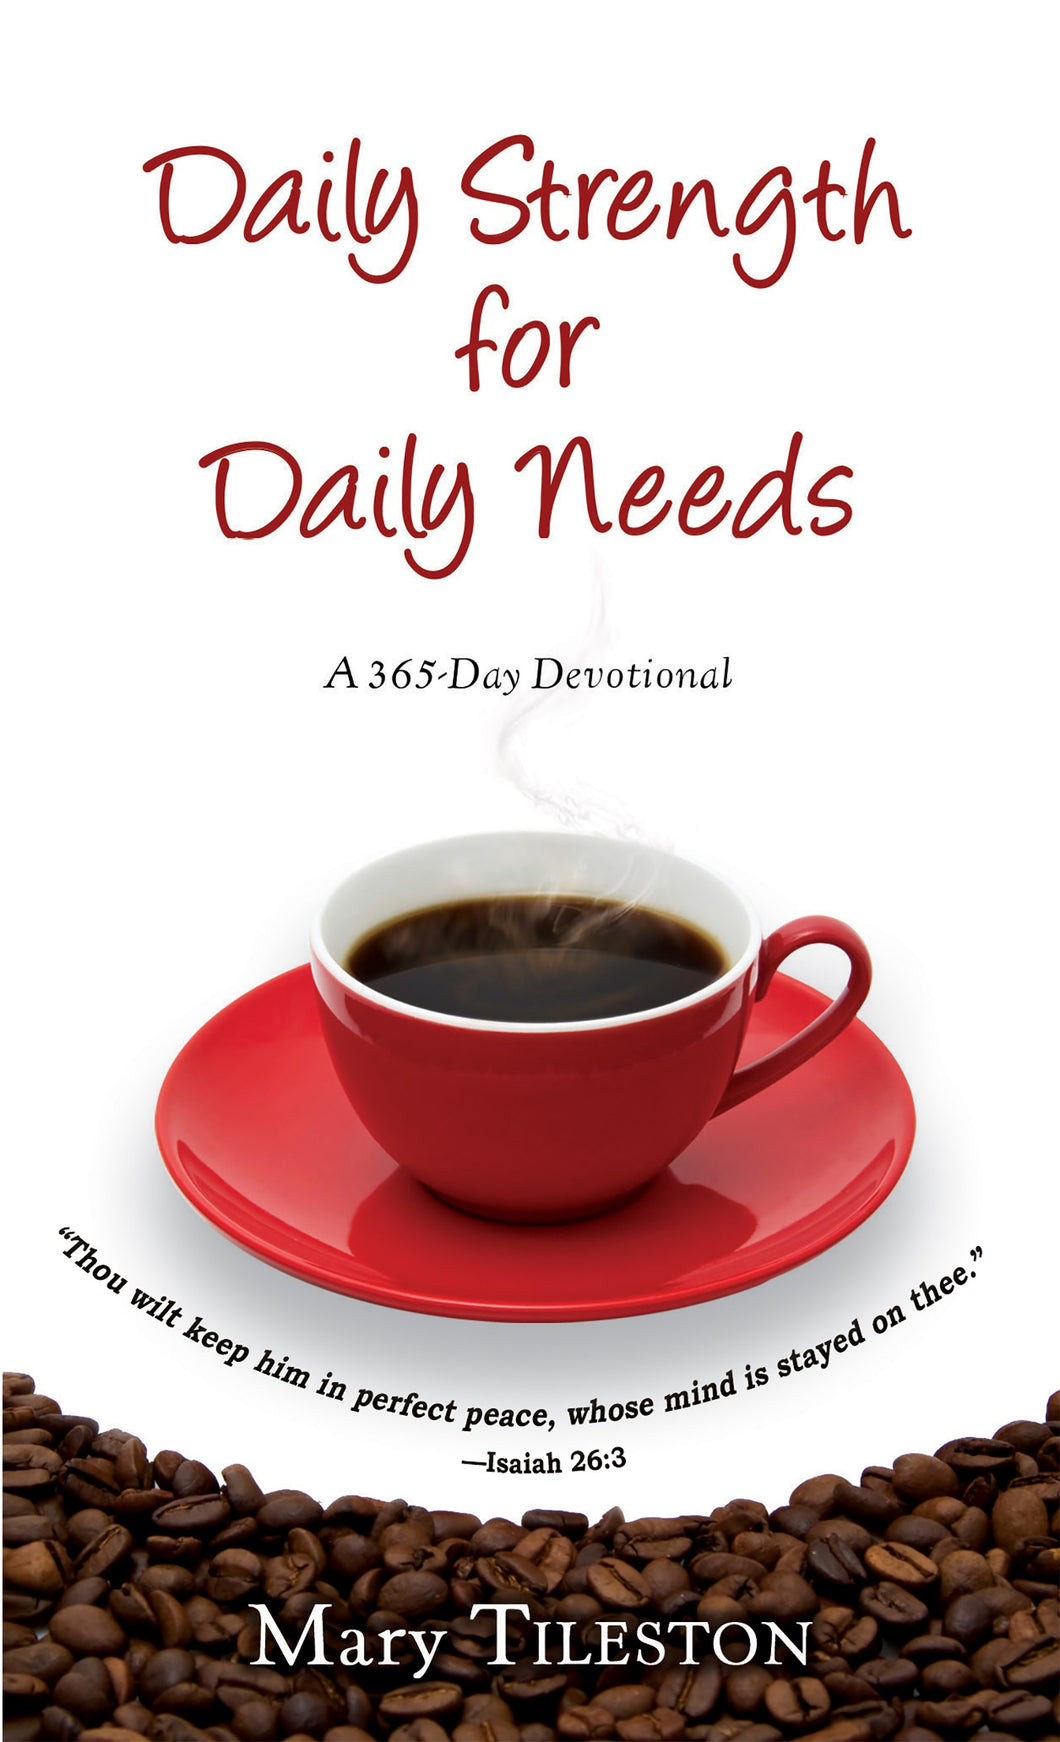 Daily Strength For Daily Needs (Order #222695)